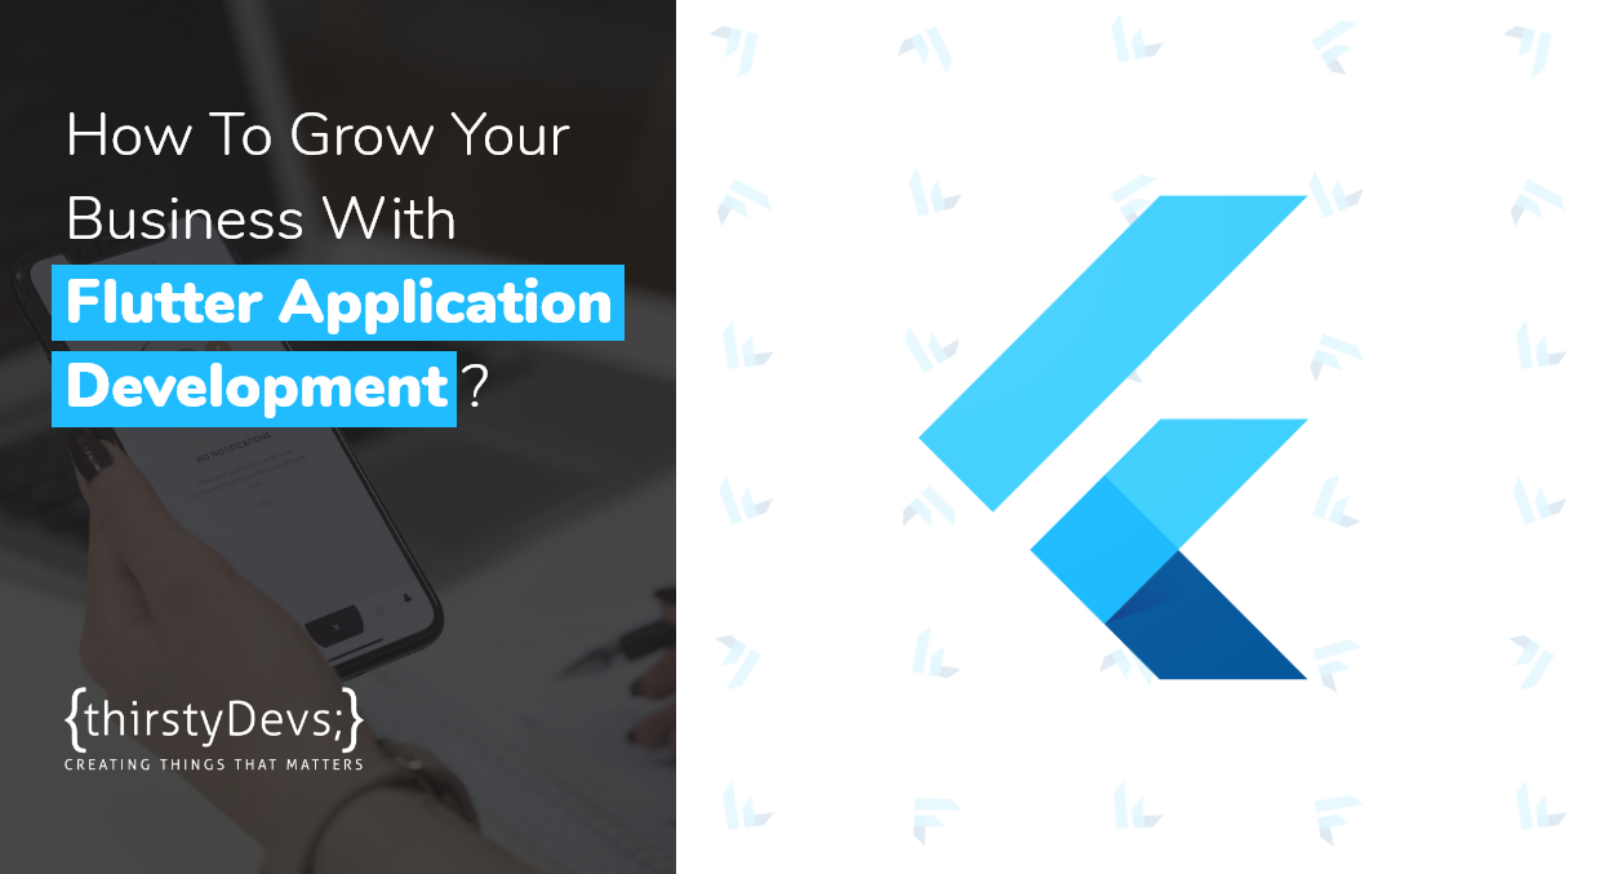 How To Grow Your Business With Flutter Application Development by thirstyDevs